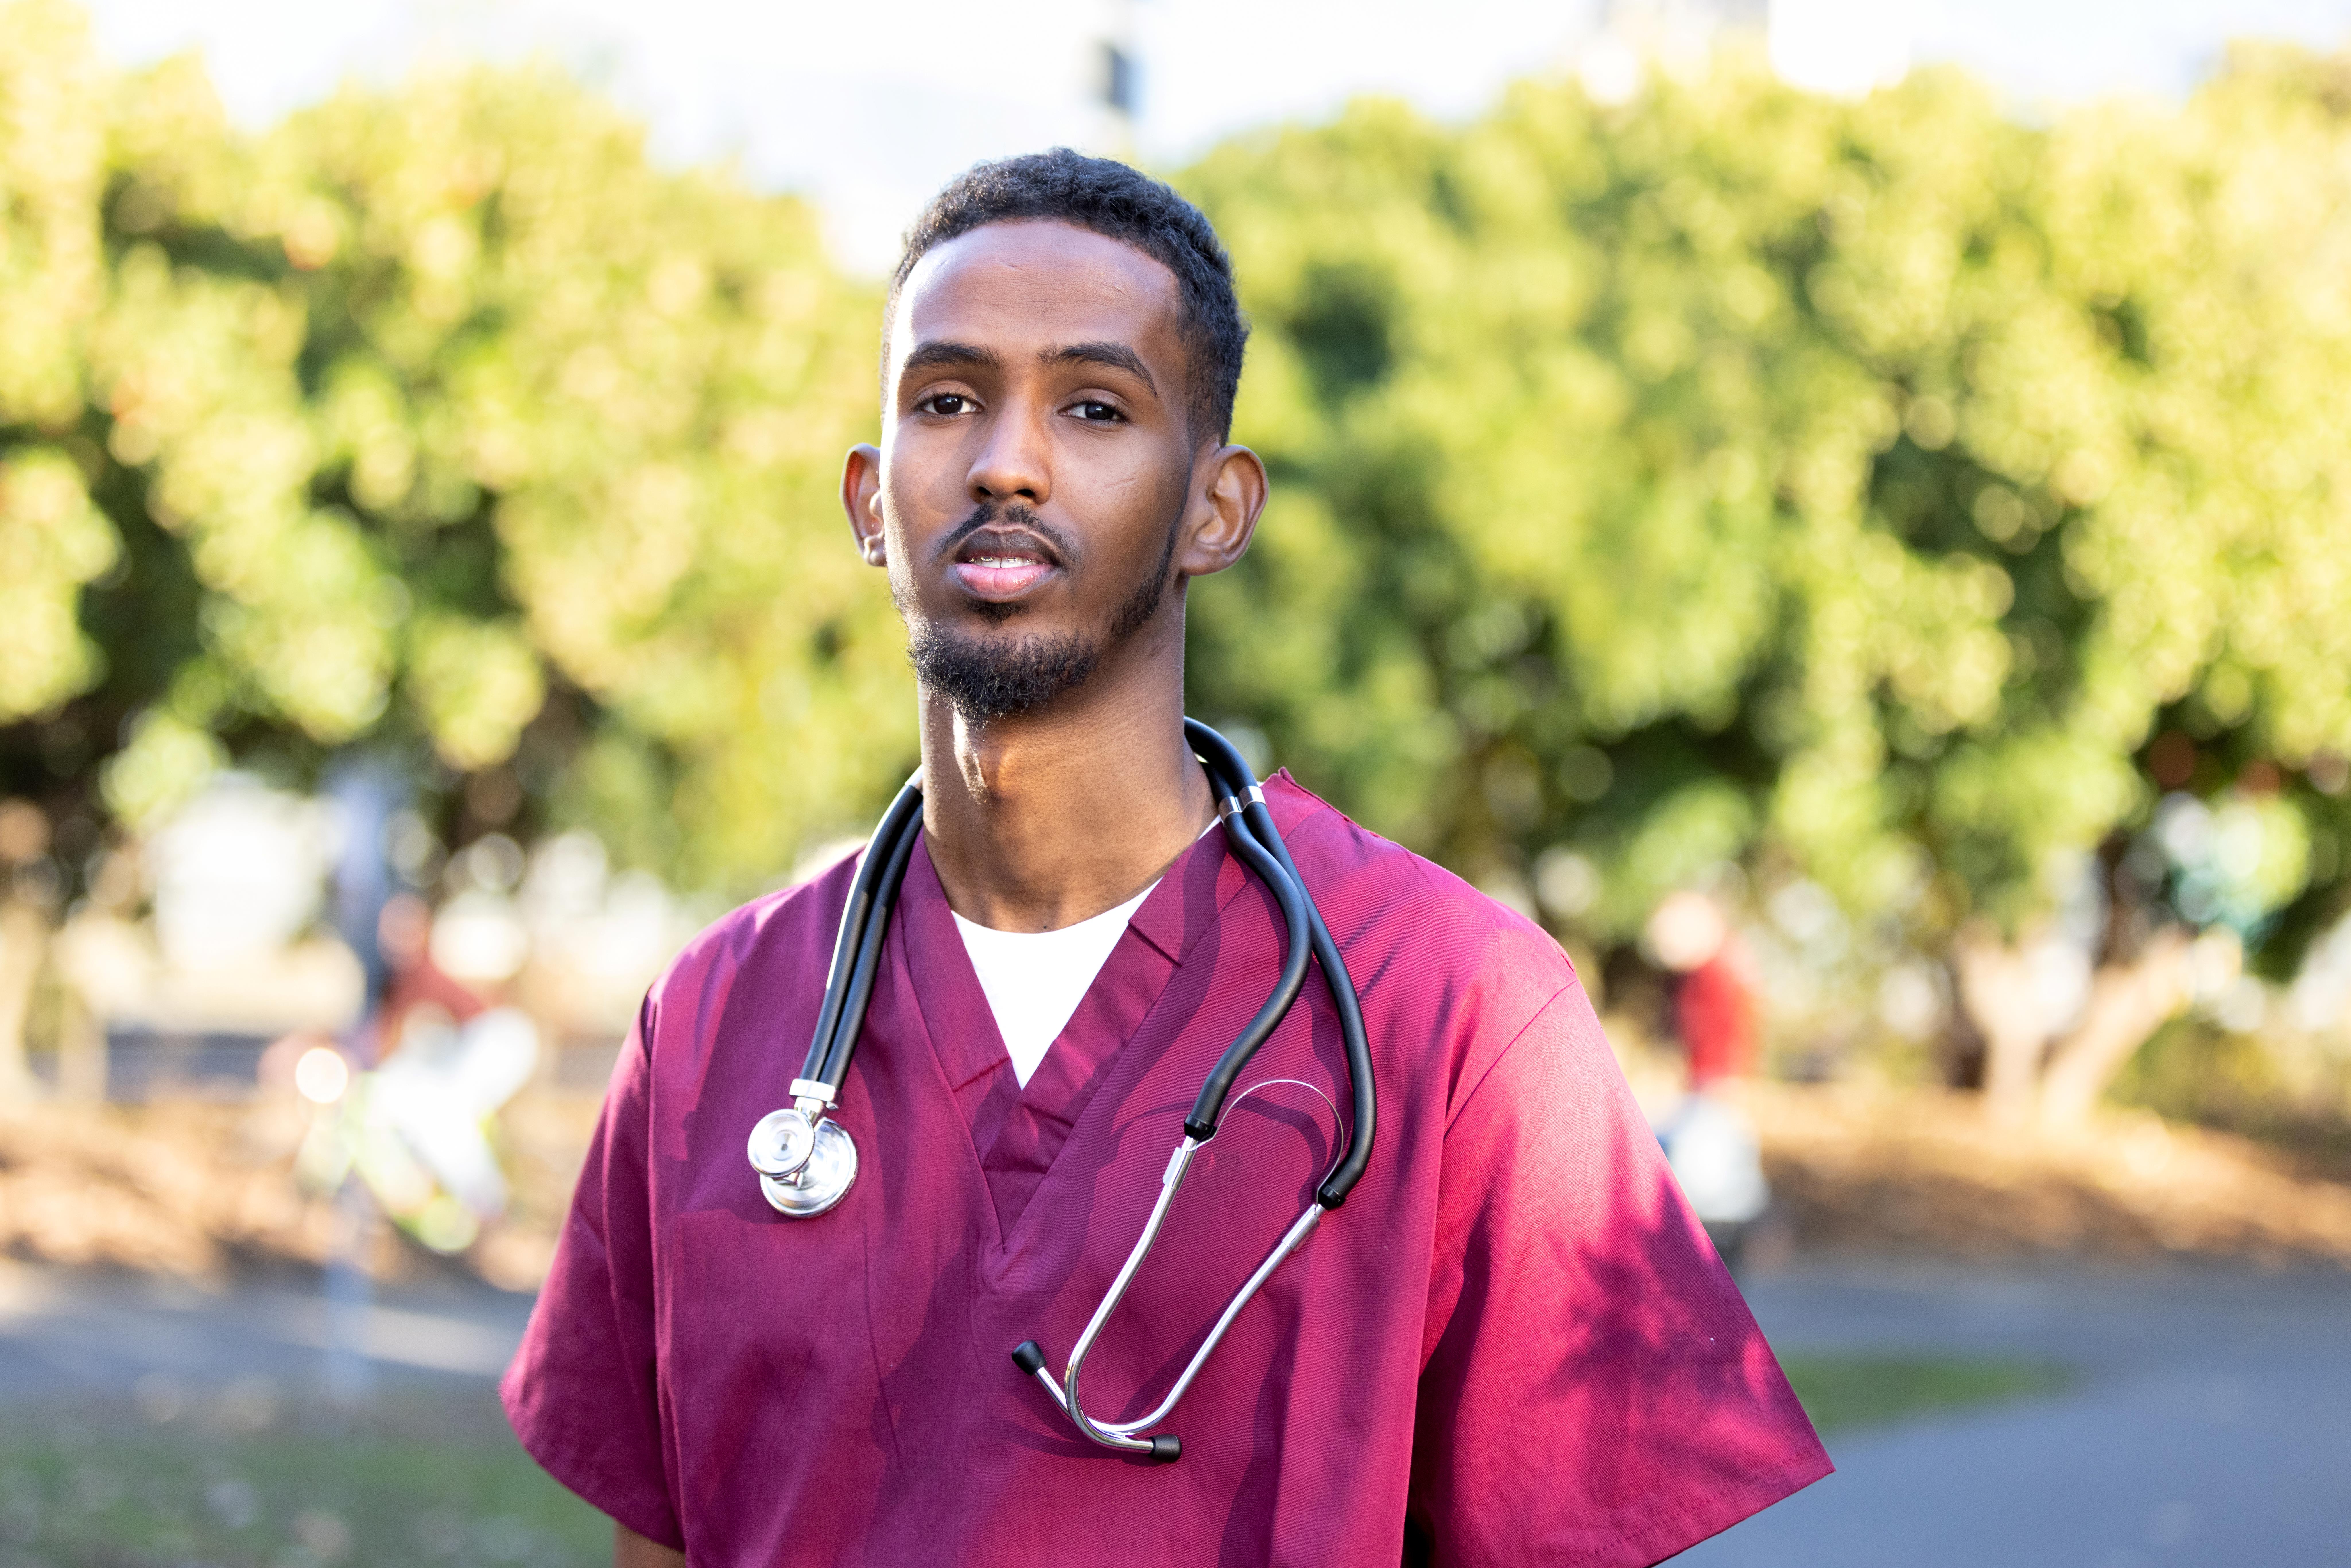 Opportunity Scholar standing in scrubs with a stethoscope around his neck